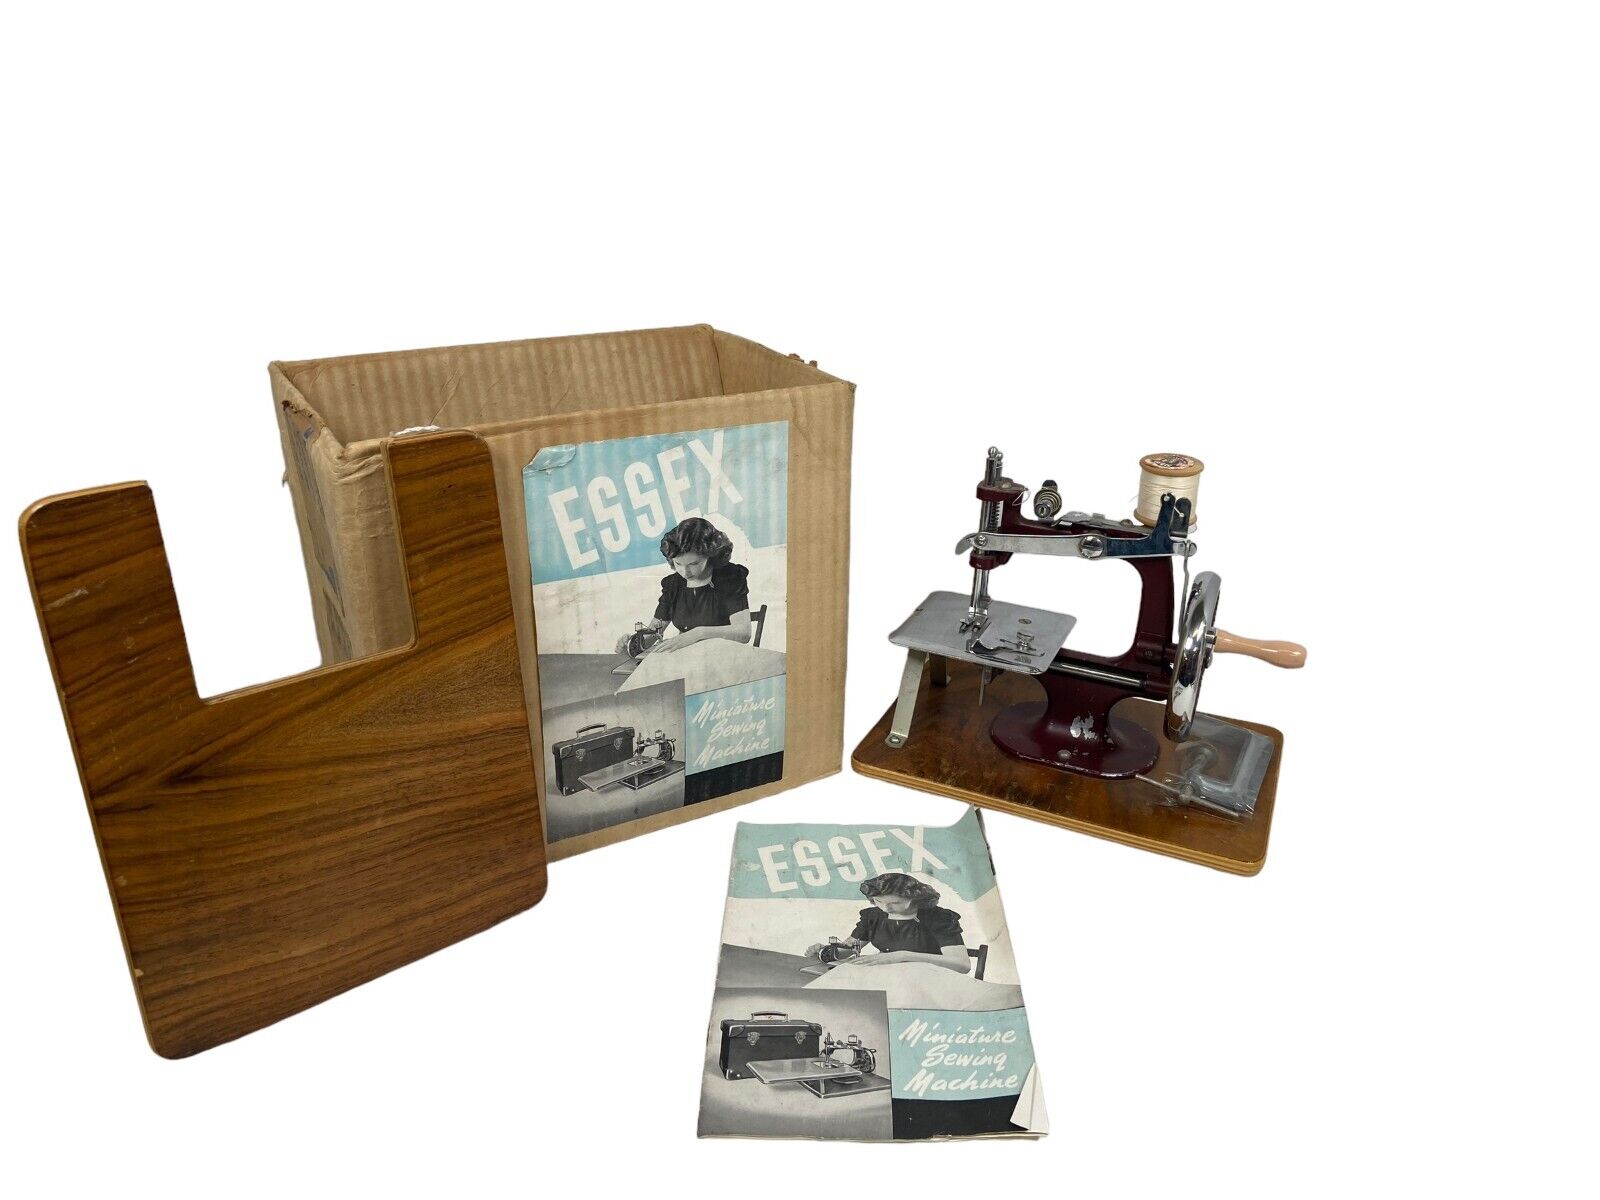 VINTAGE BRITISH ESSEX MARK 1 SEWING MACHINE WITH ORIG BOX AND INSTRUCTIONS